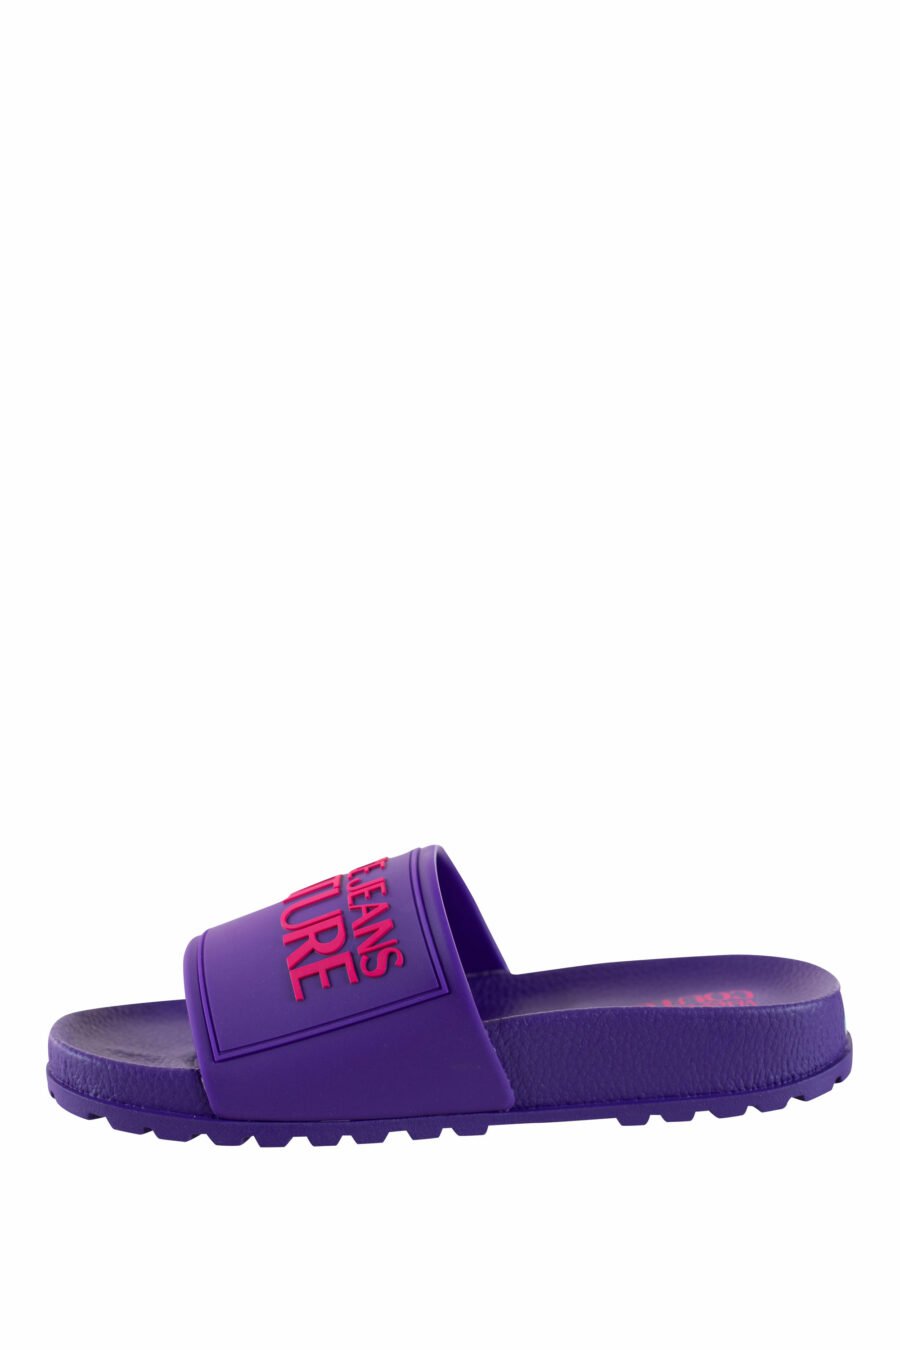 Purple flip-flops with logo and rough sole - IMG 4385